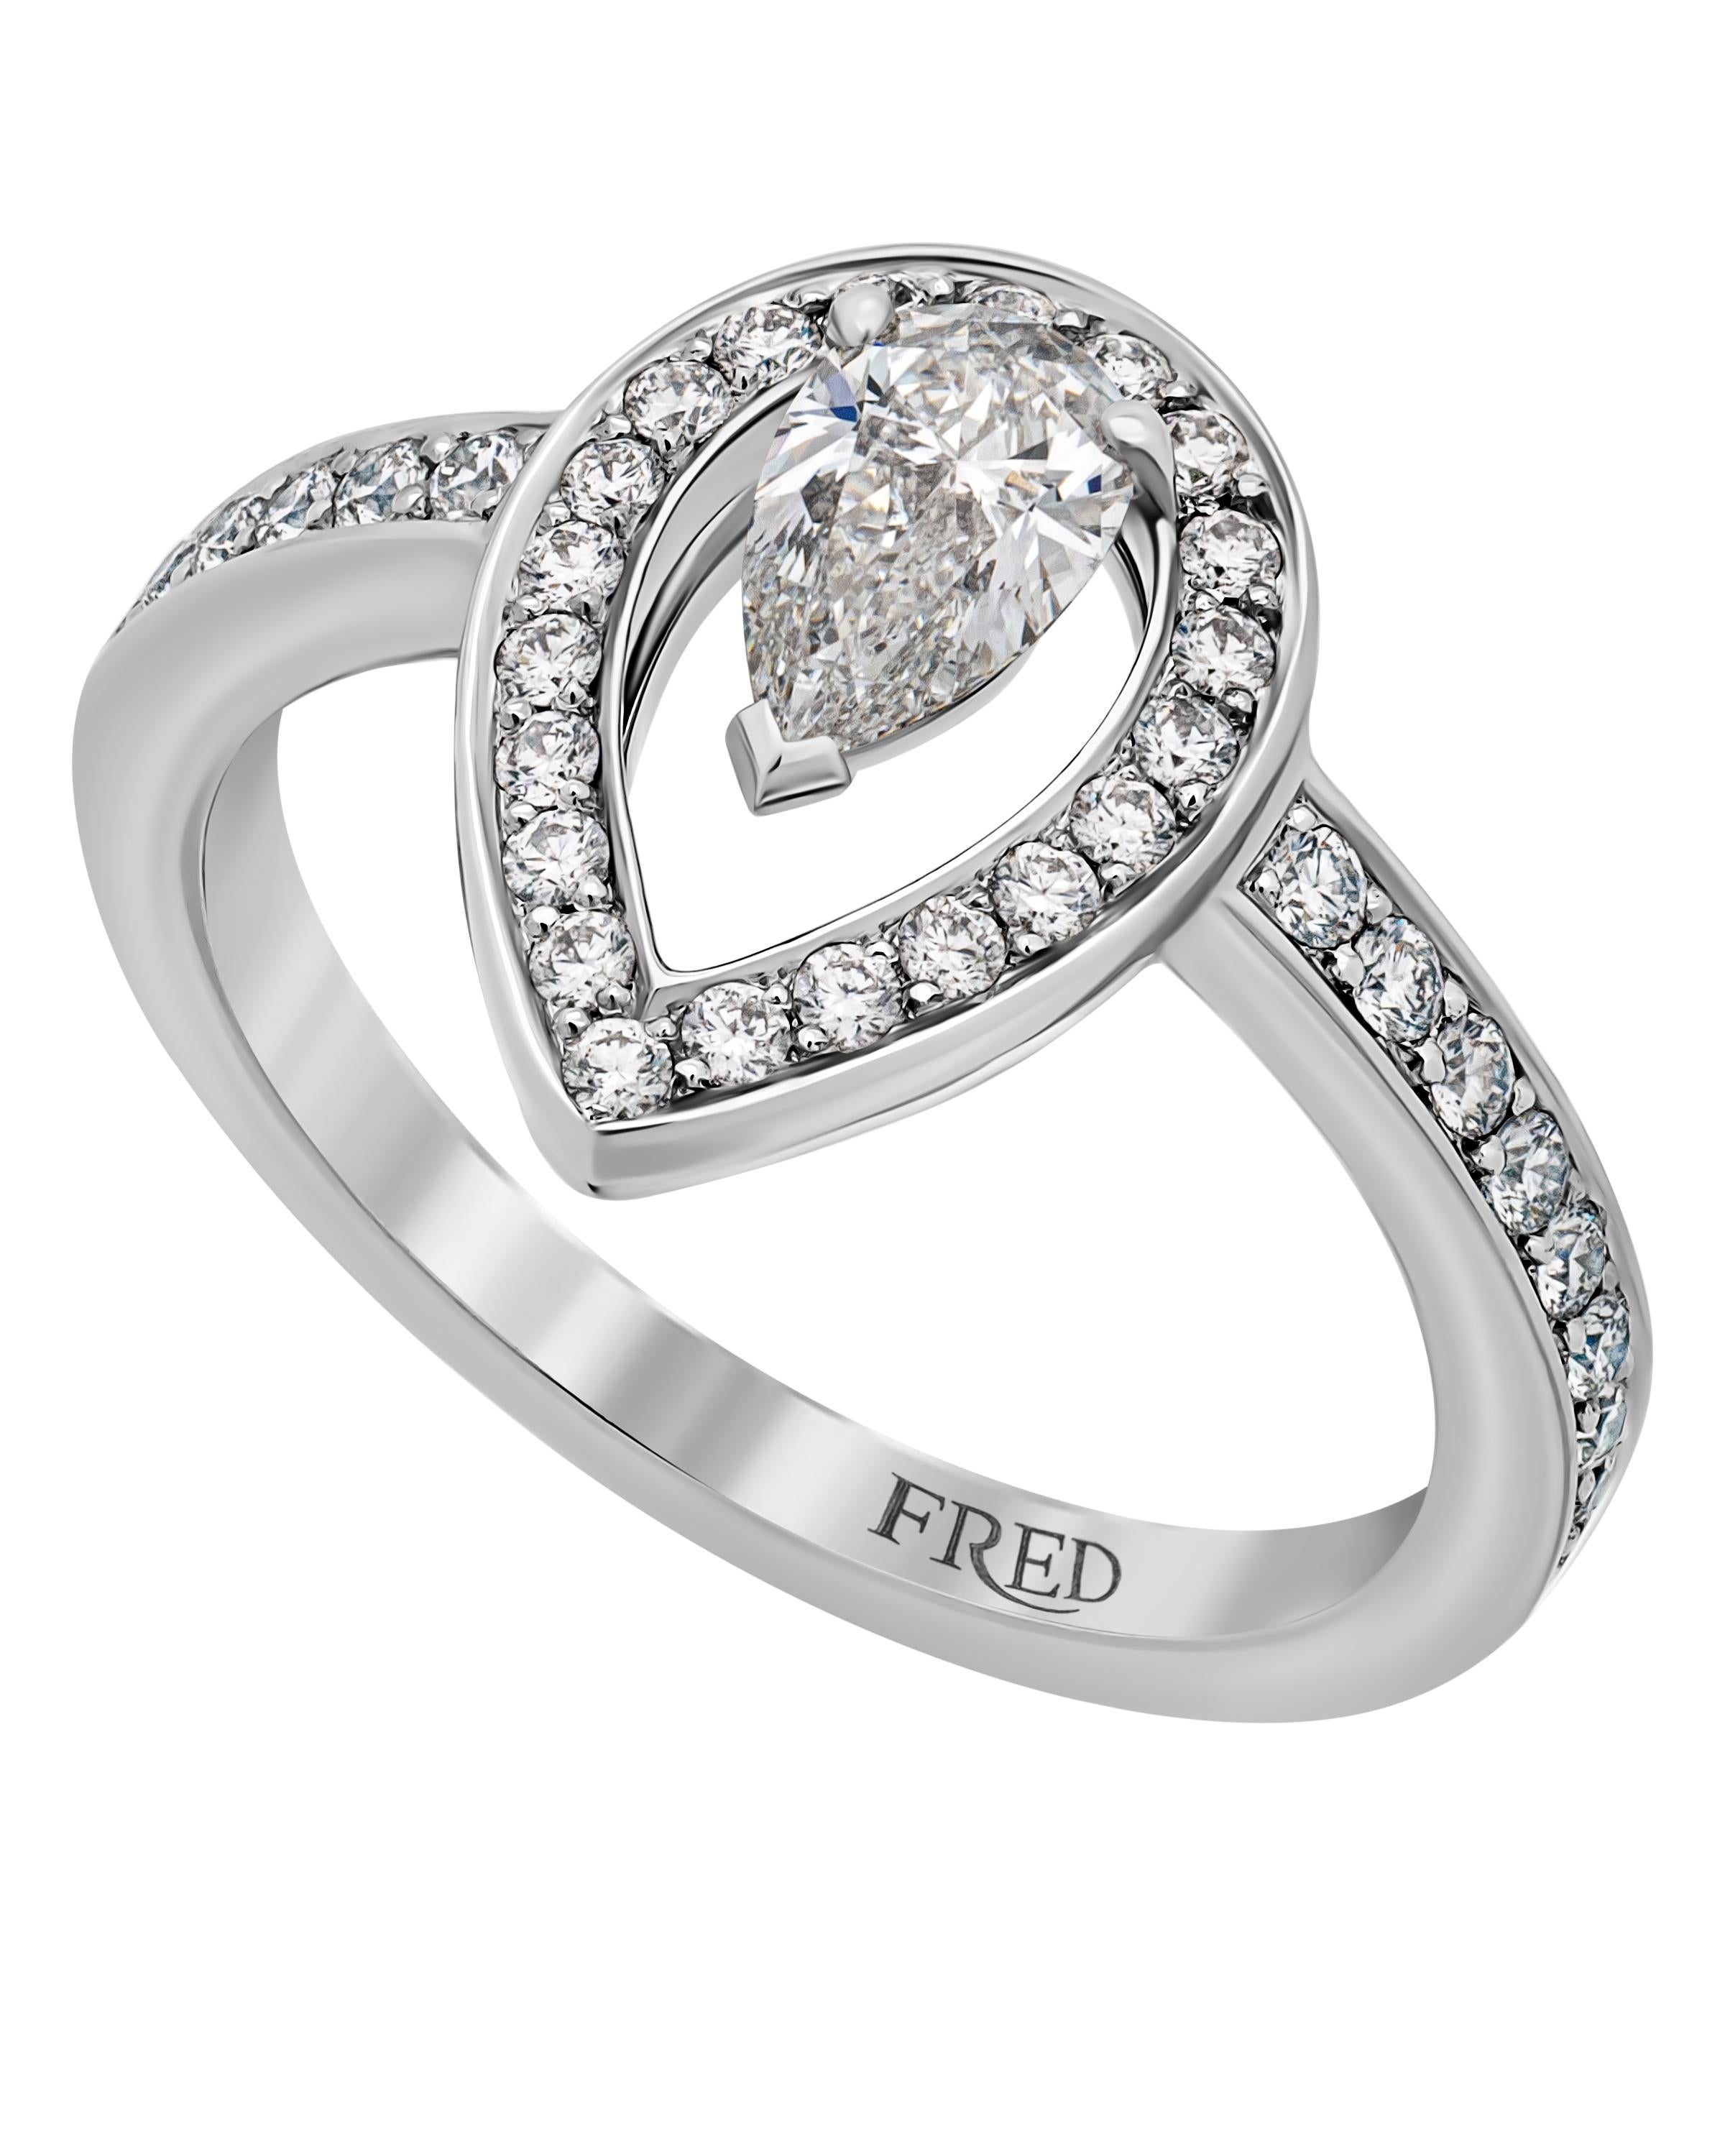 This timeless FRED Platinum statement ring features a 0.31ct. tw. pear cut diamond center shimmering with 0.34ct. tw. round diamonds. The diamond color: E, Clarity: I-F. The ring size is 4.75 (48.7). The statement width is 1/2